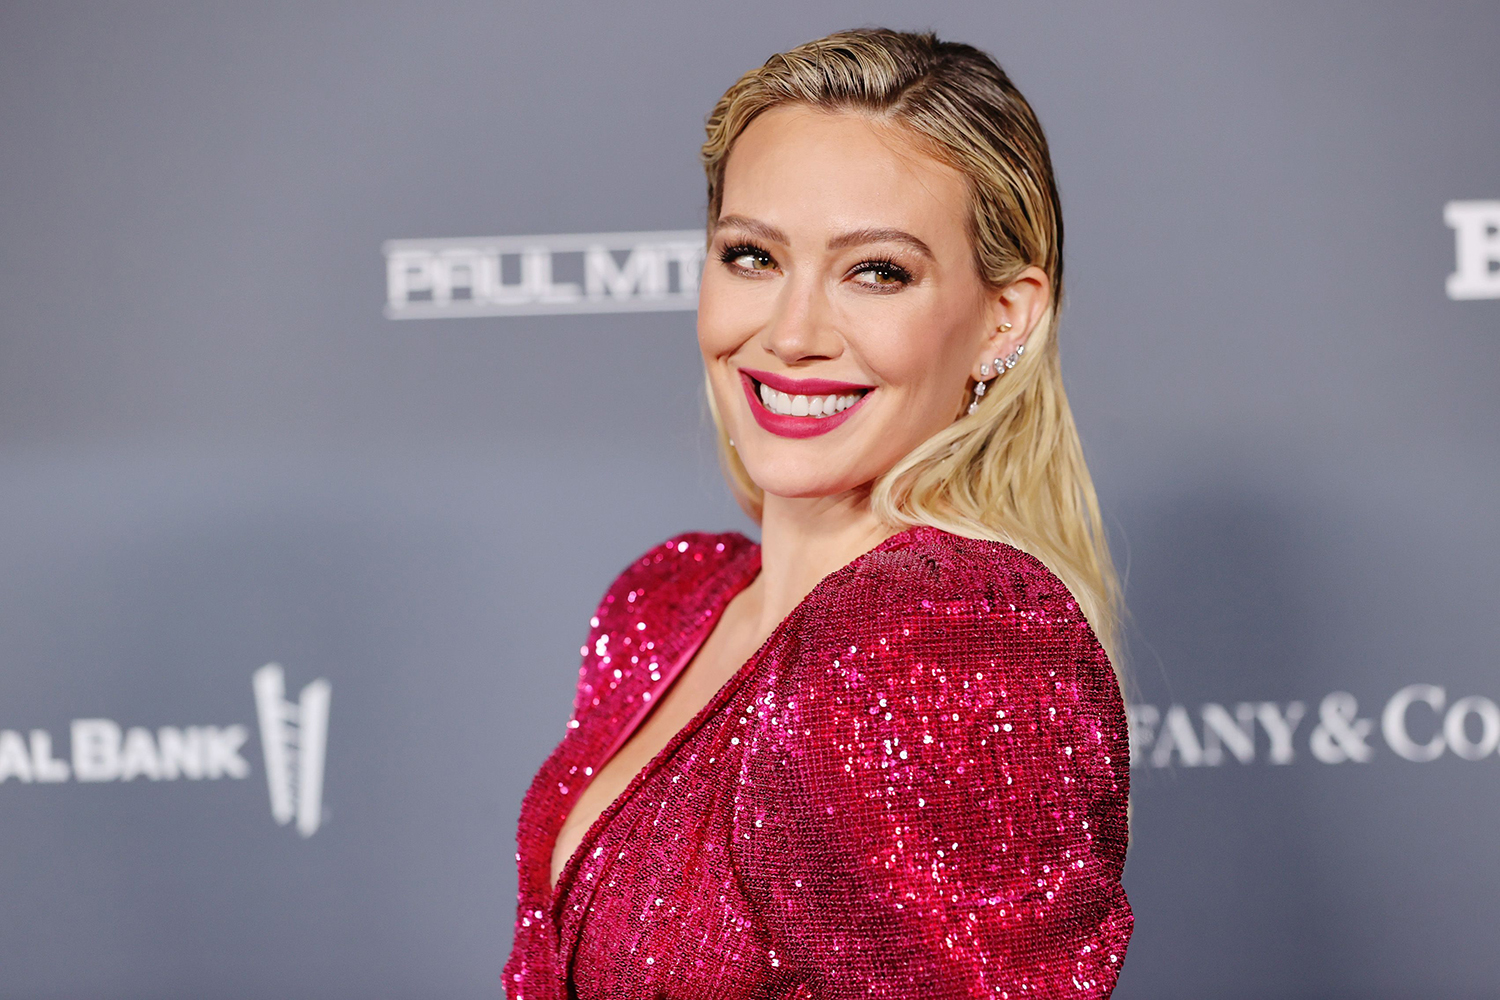 Lizzie McGuire star Hilary Duff attends the Baby2Baby 10-Year Gala